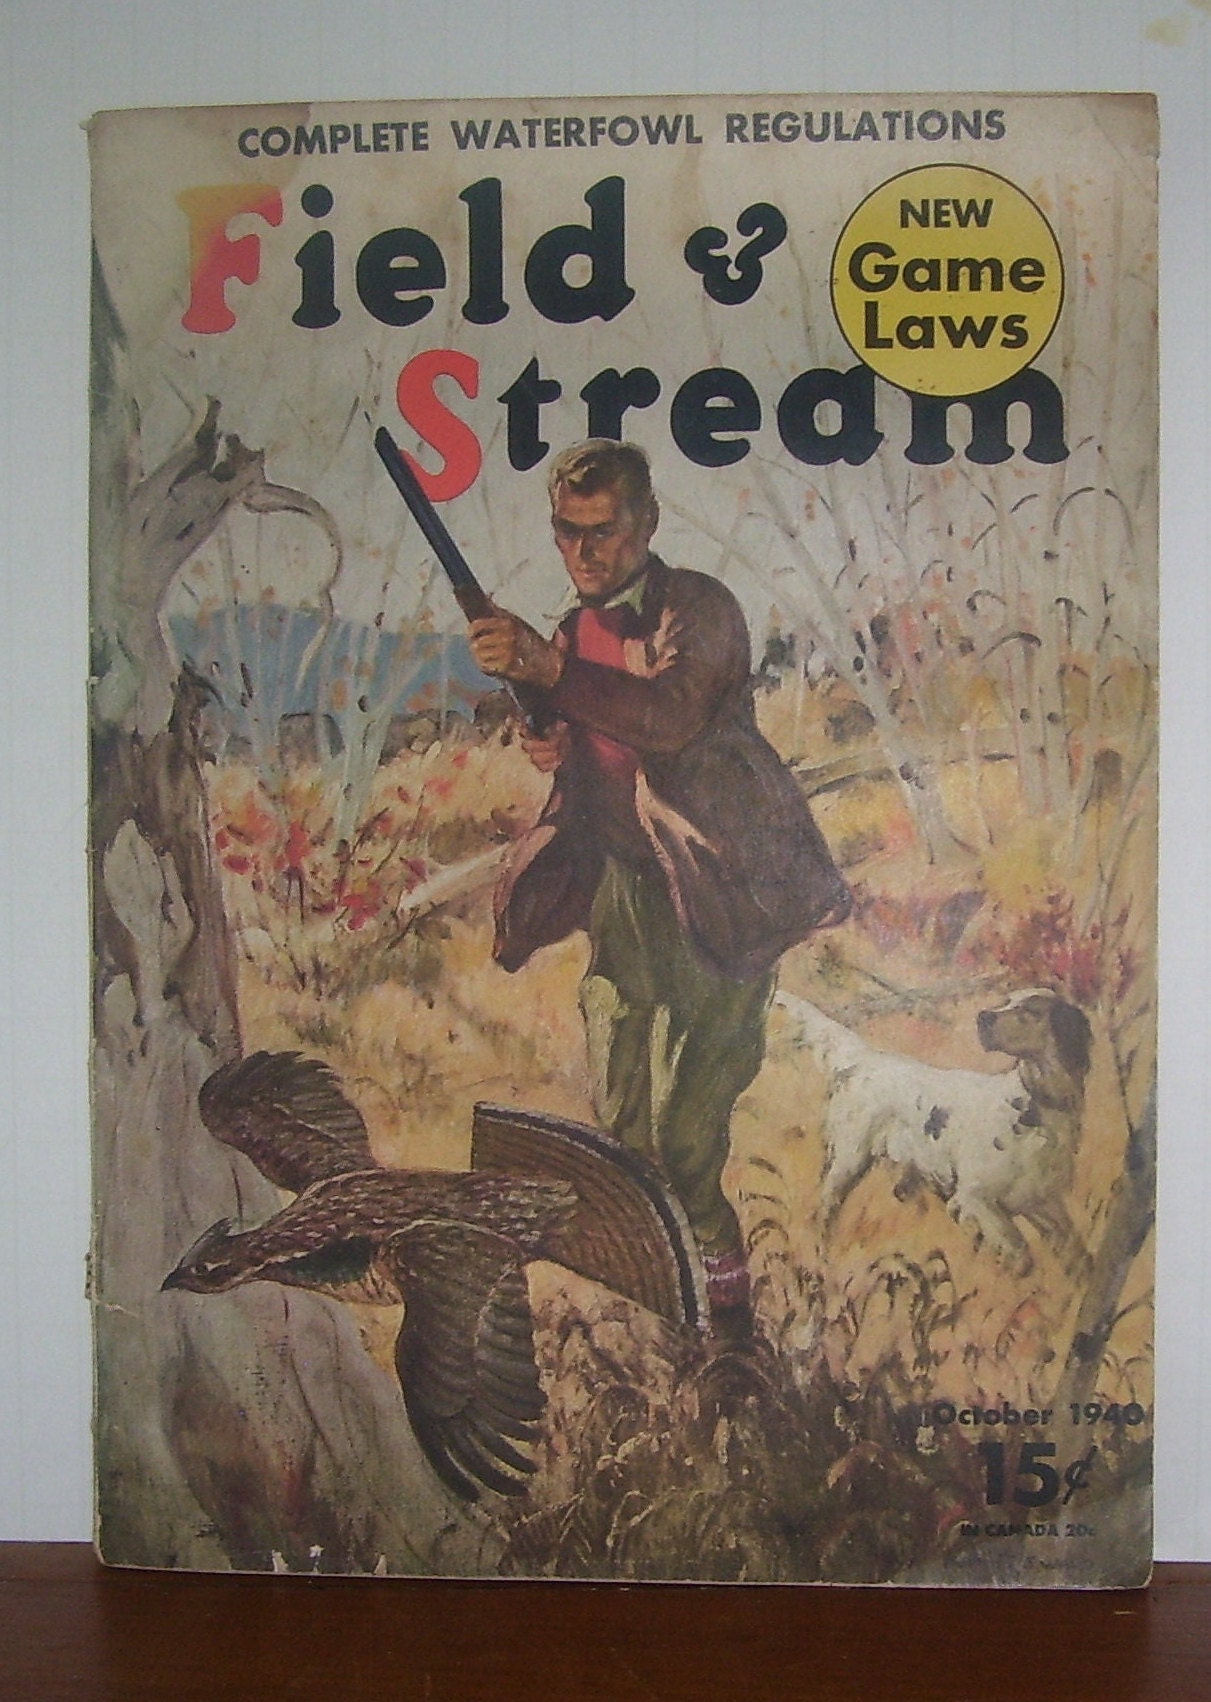 Vintage Fly Fishing Poster Field and Stream Print Retro Fisherman Print  Outdoorsy Wall Art Gift for Him Dad 